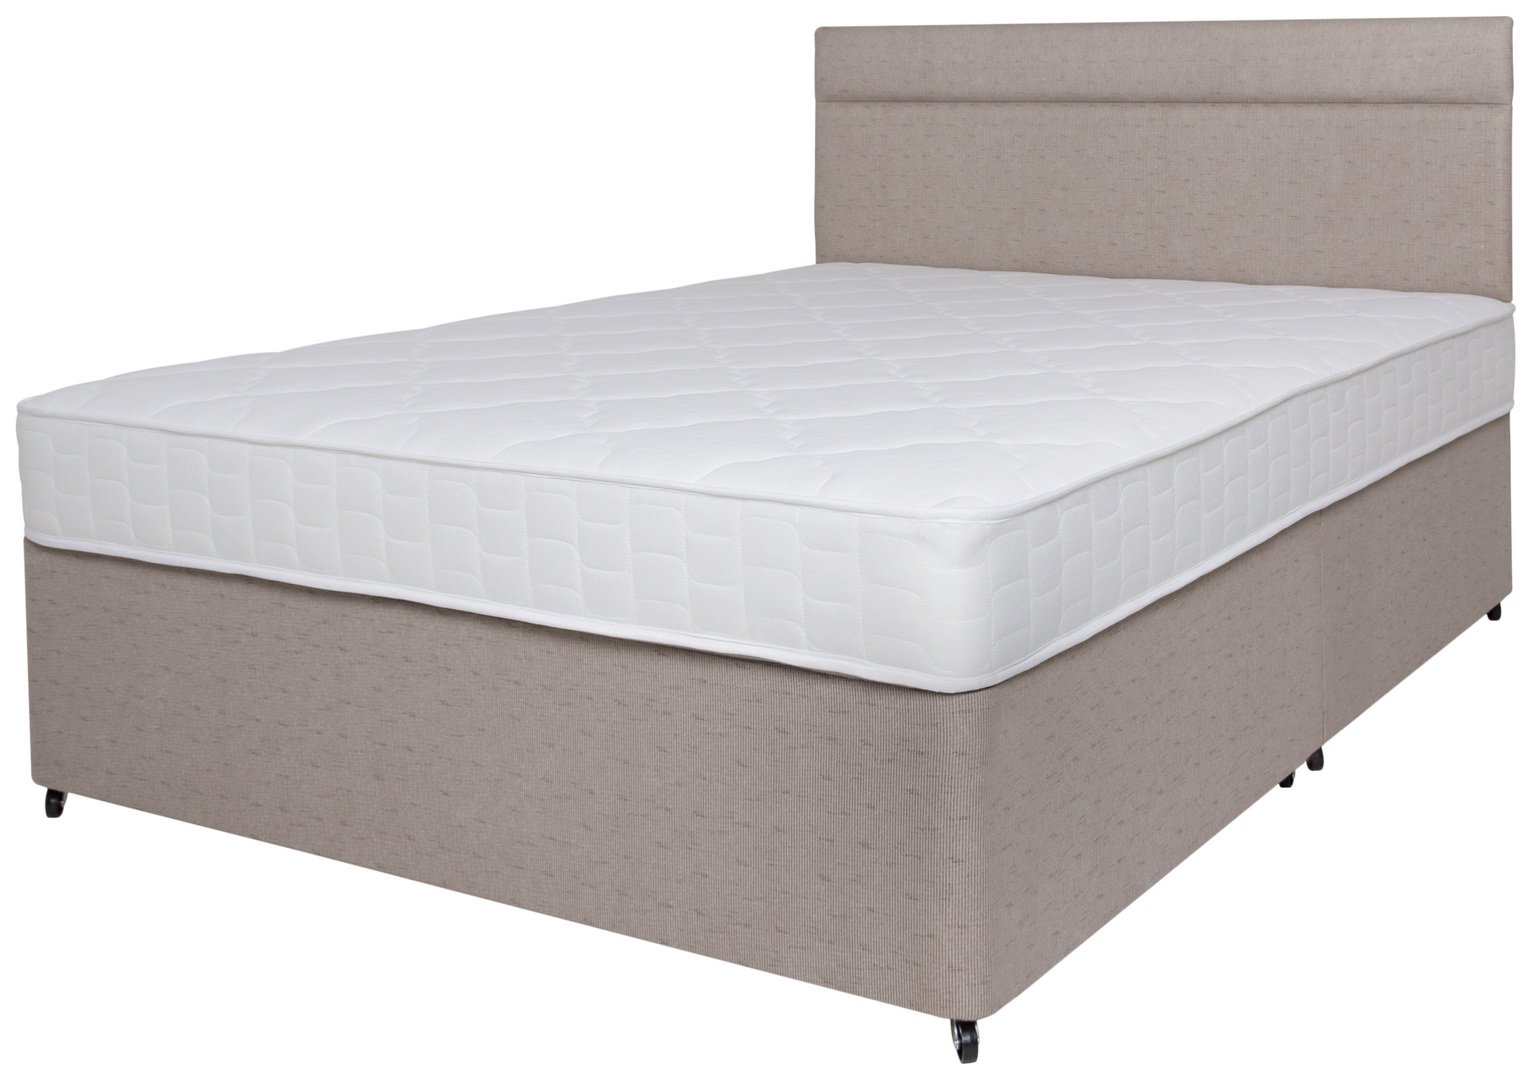 Airsprung Bower Memory Divan Bed - Double